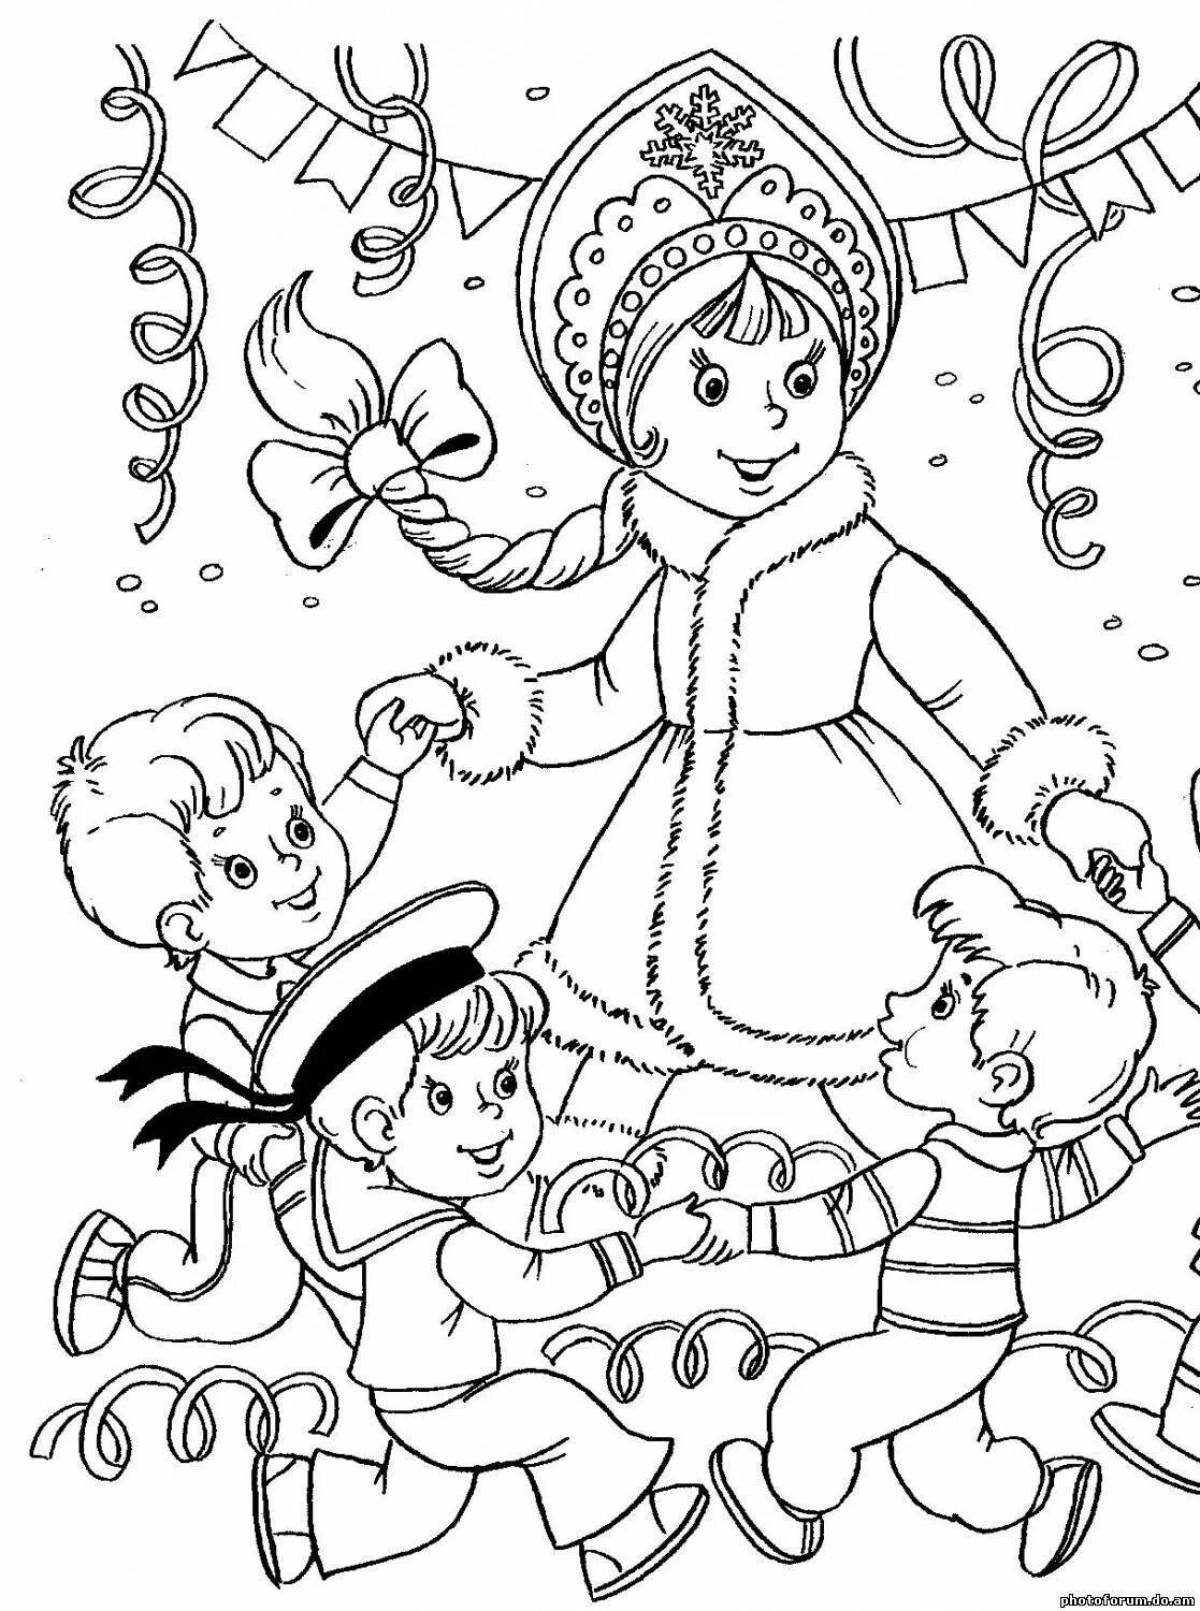 Glowing carol coloring book for children 6-7 years old